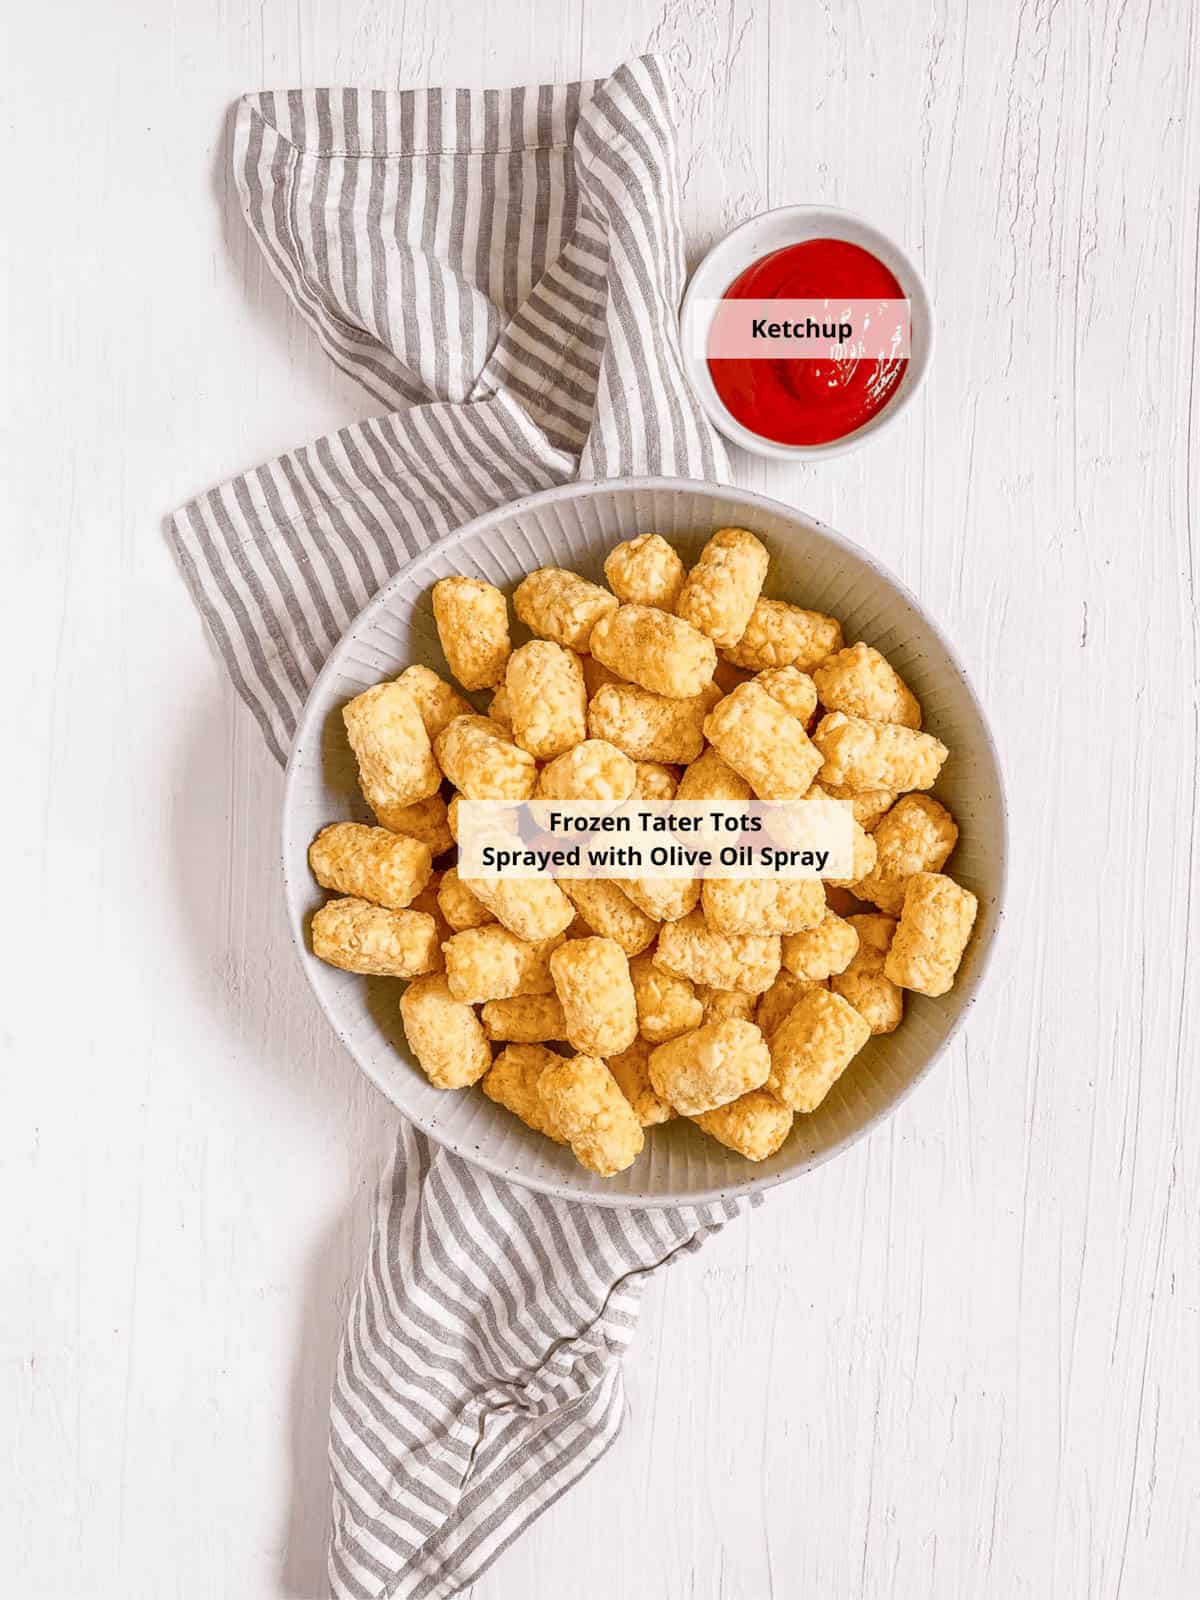 Ingredients for air fryer frozen tater tots recipe on a white background.